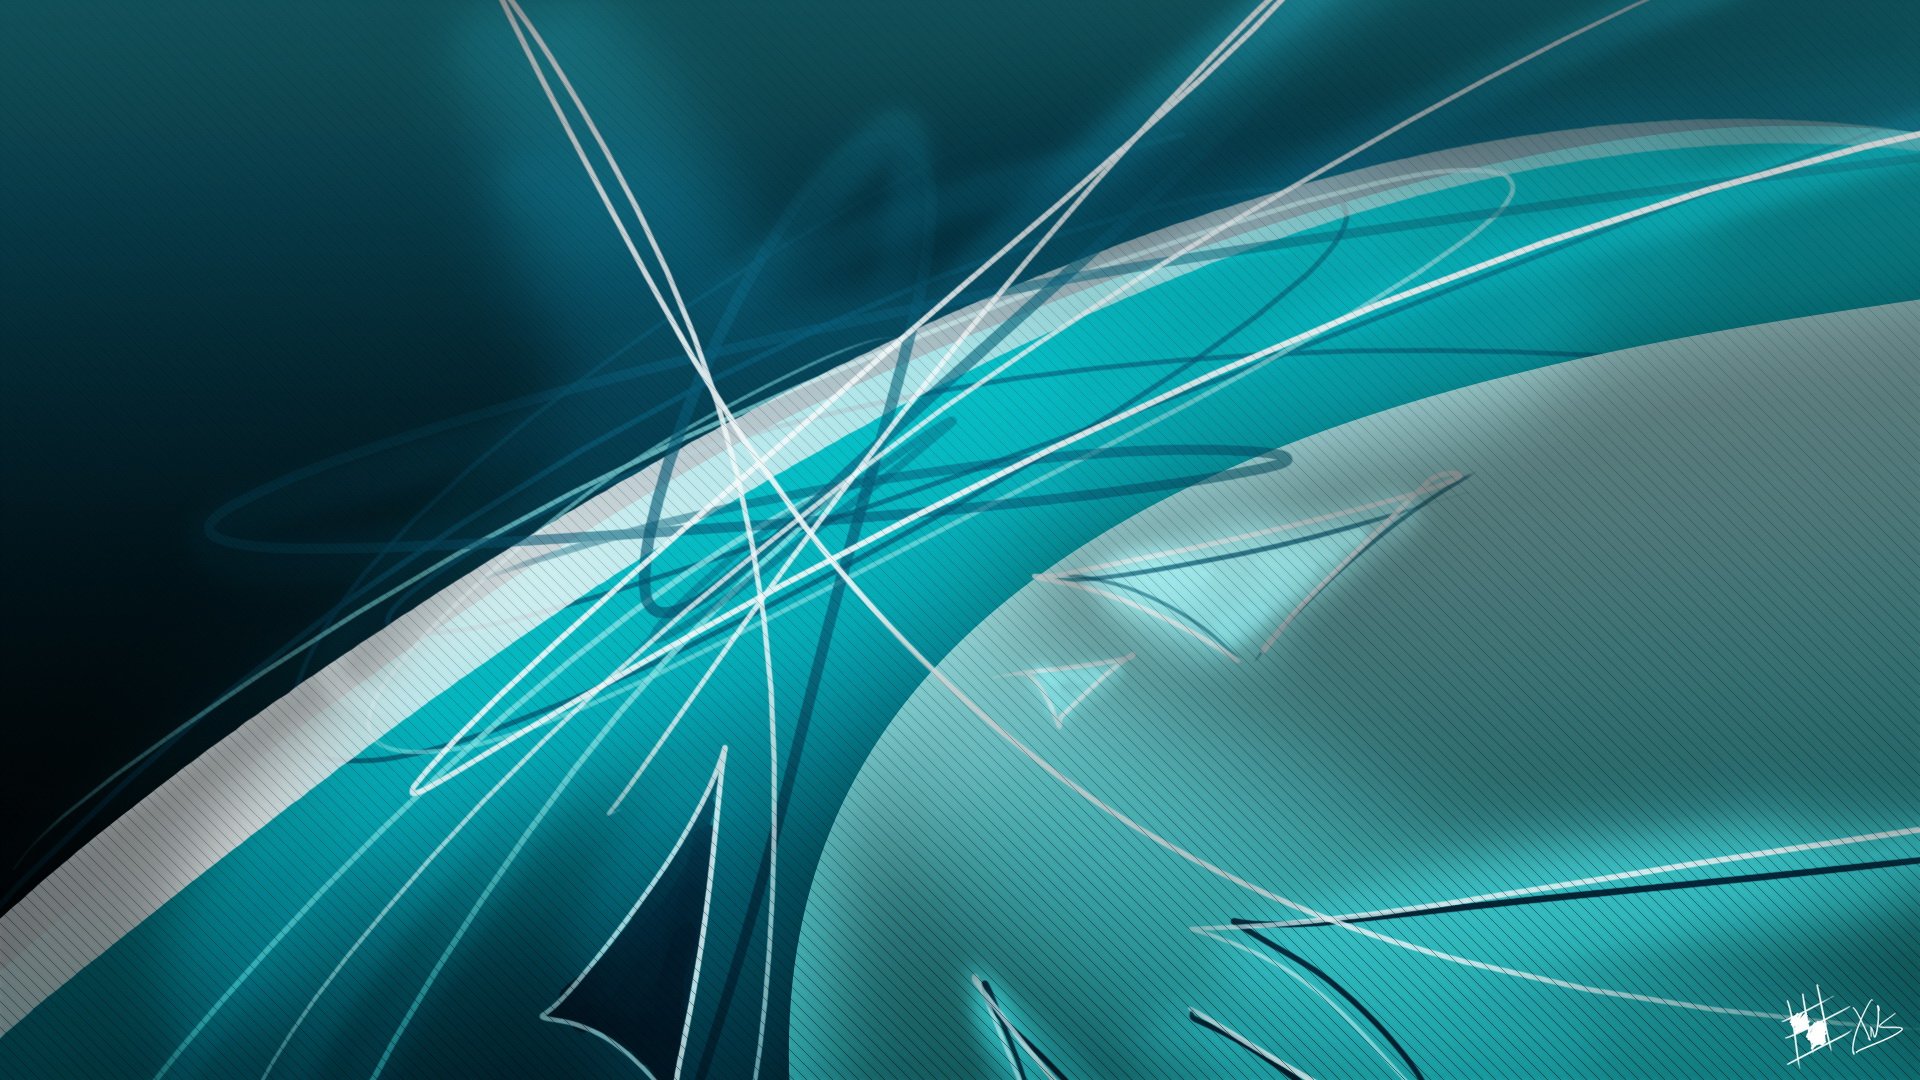 Abstract Turquoise Hd Wallpaper Background Image 1920x1080